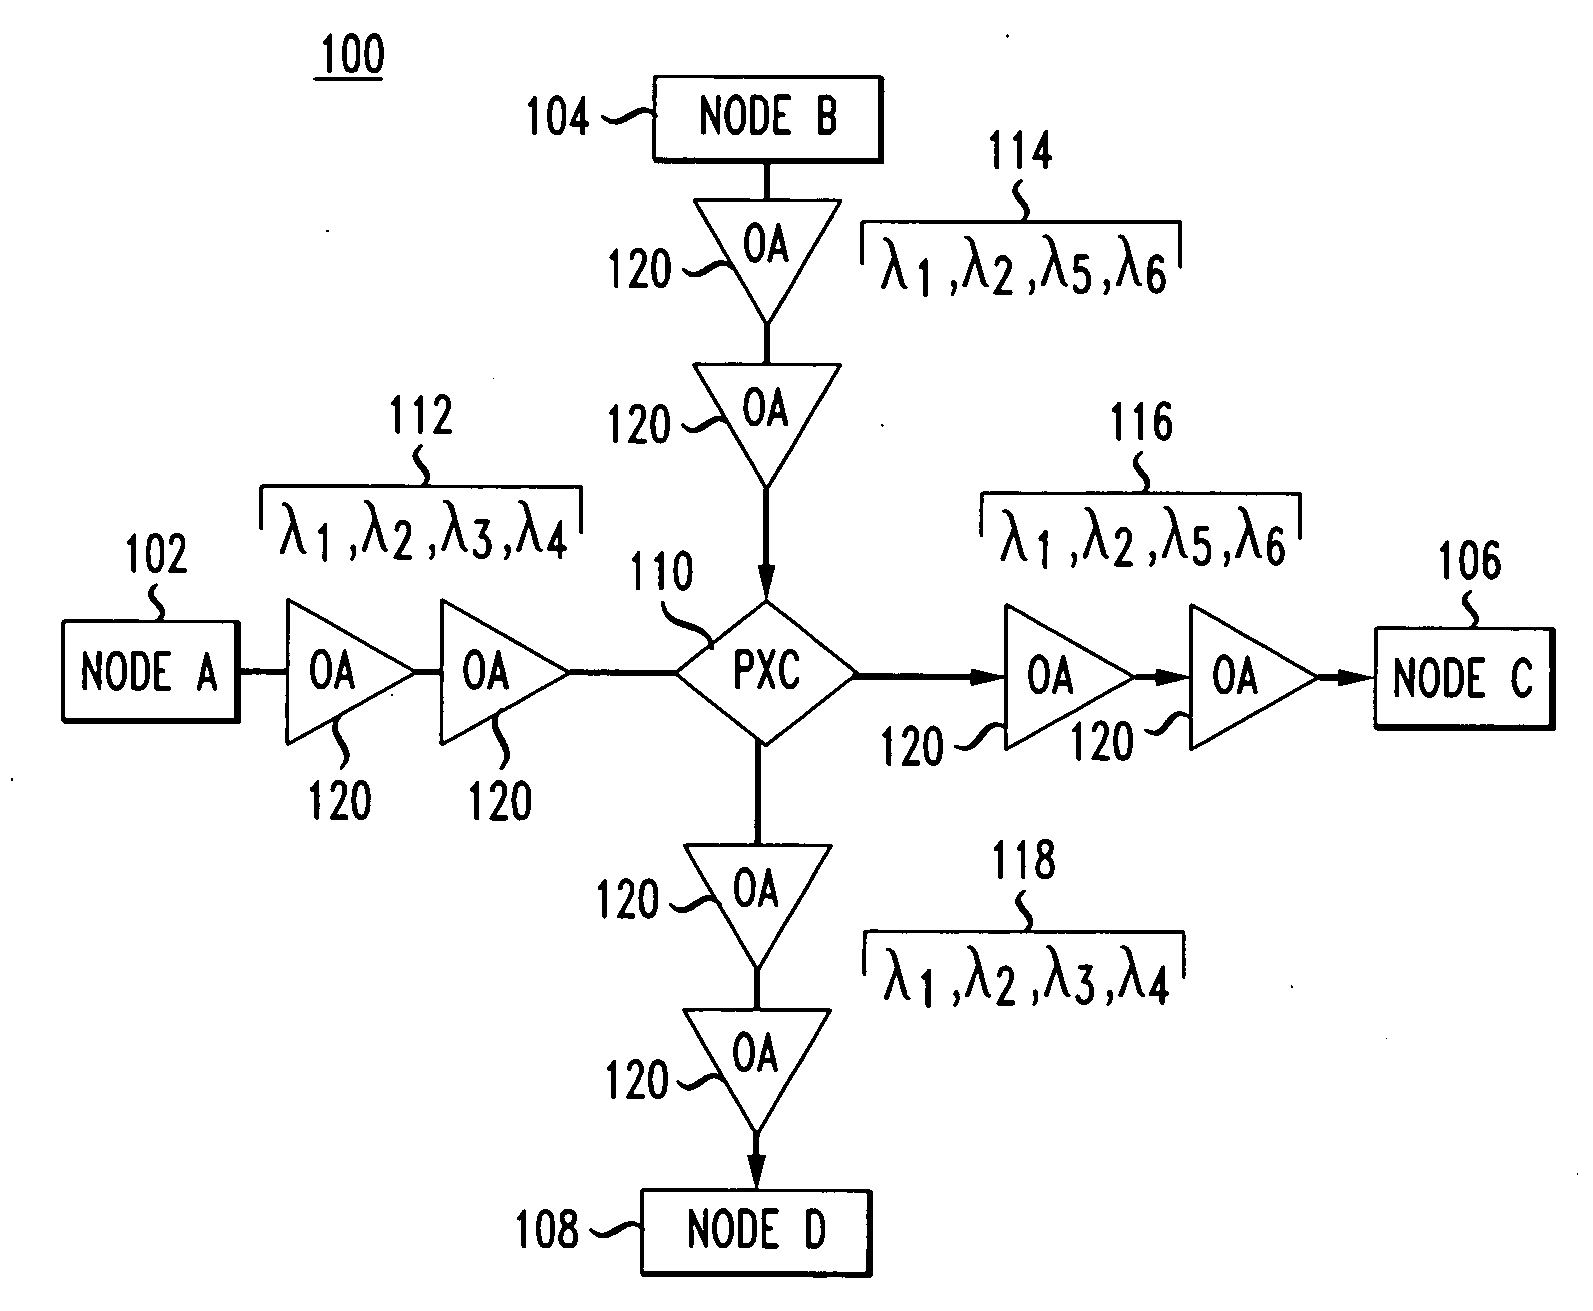 Method for lightpath monitoring in an optical routing network